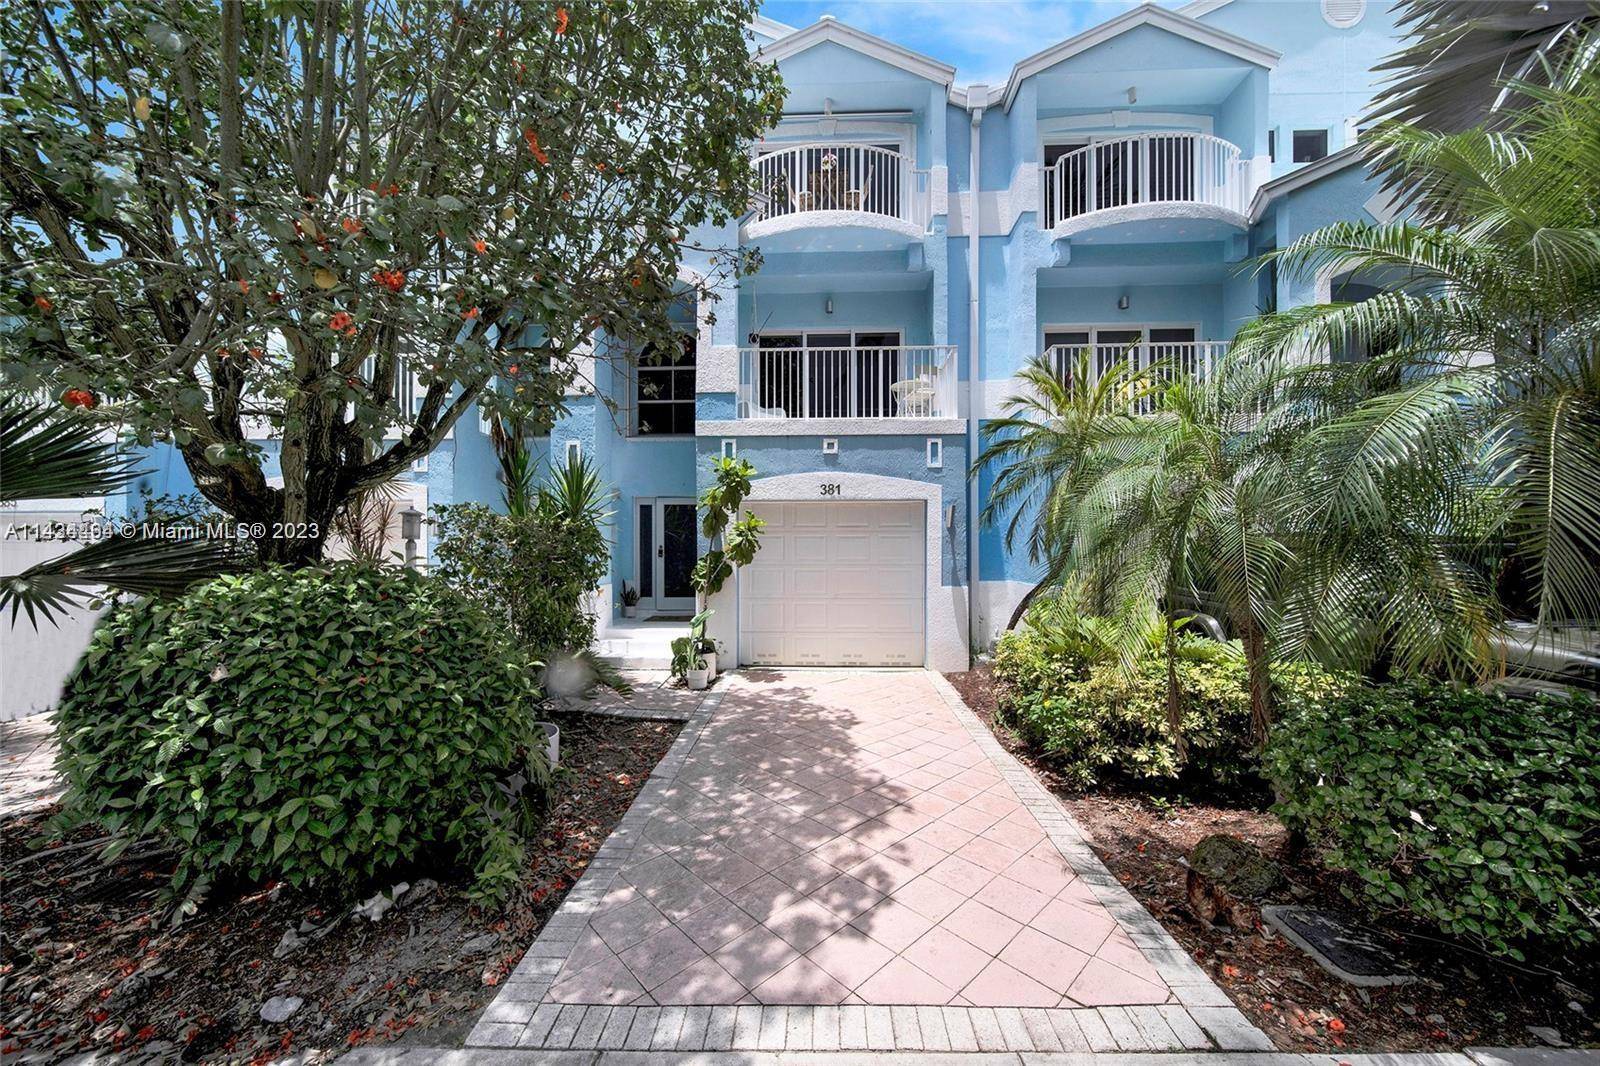 Fully renovated beach townhouse at an amazing location facing a Natural reserve steps away from the beach.